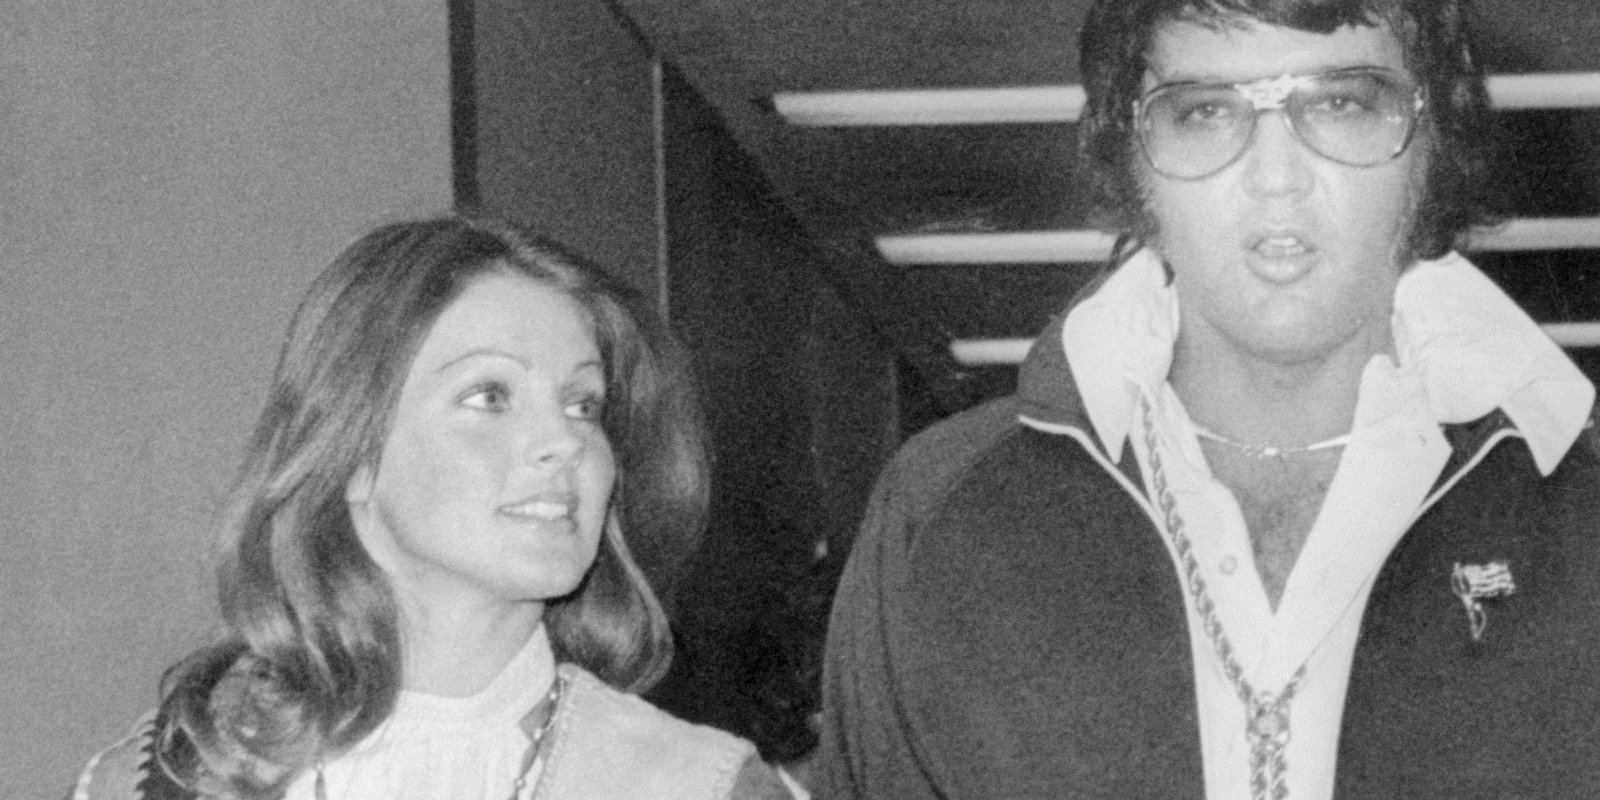 Priscilla and Elvis Presley the day of their 1975 divorce walking out of the court proceedings together.